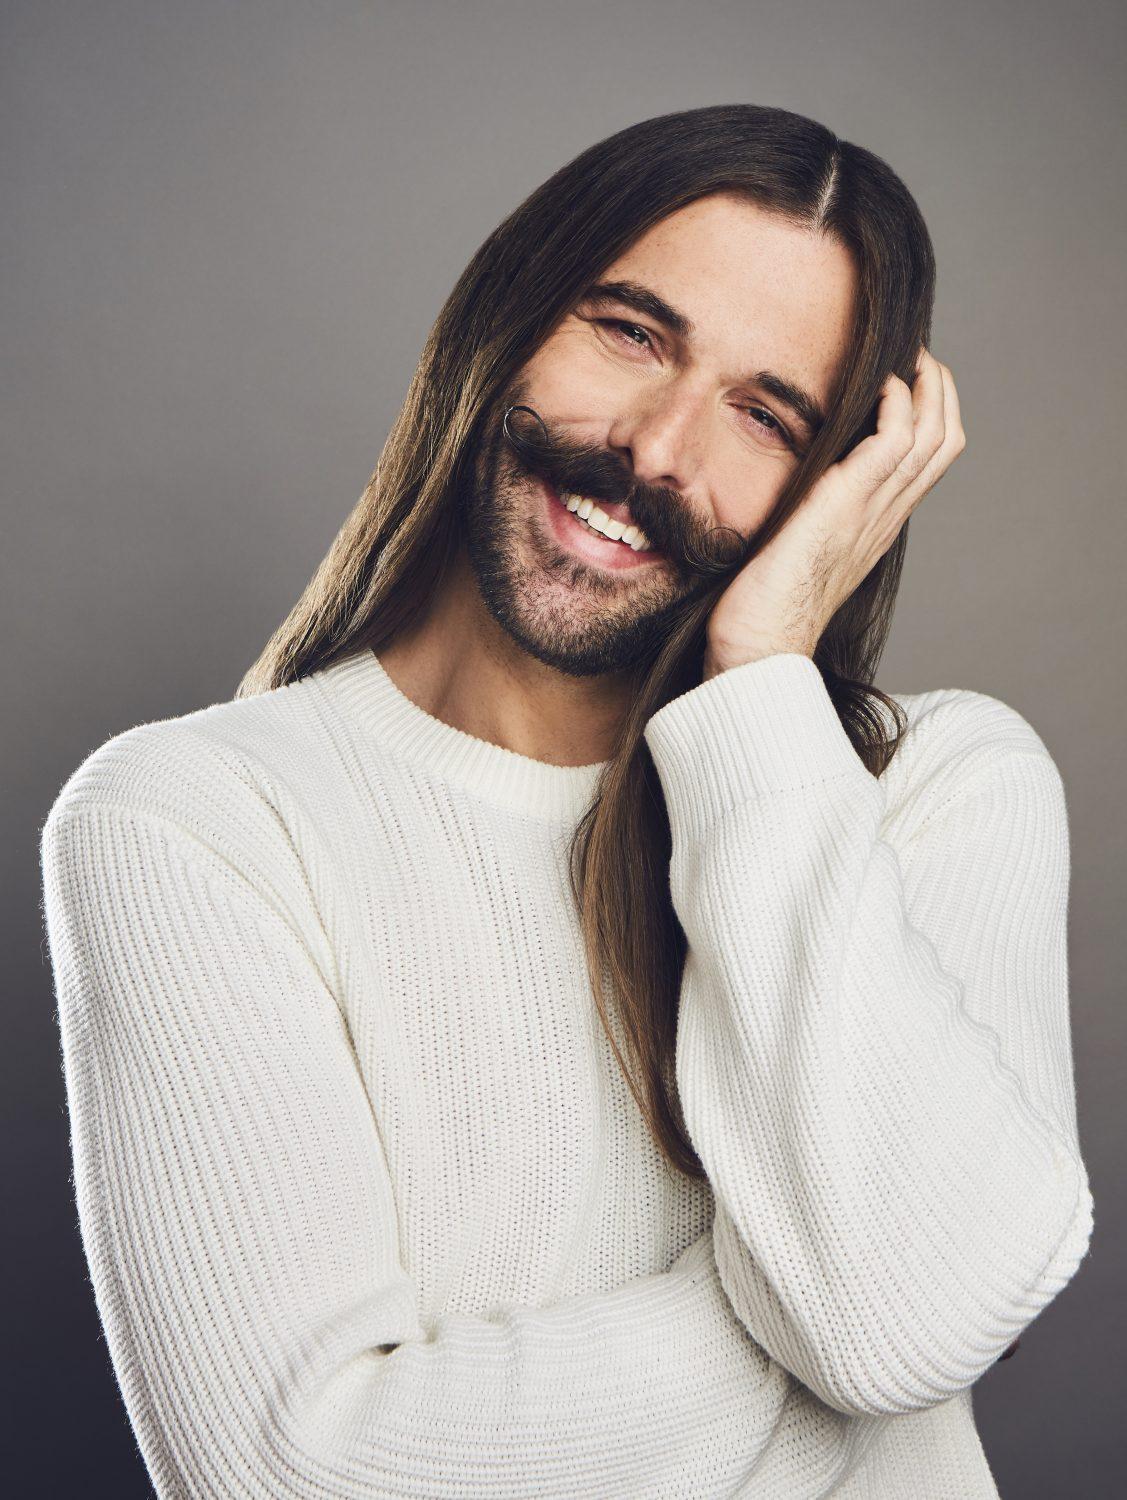 “Queer Eye” star Jonathan Van Ness has nothing to prove — except in